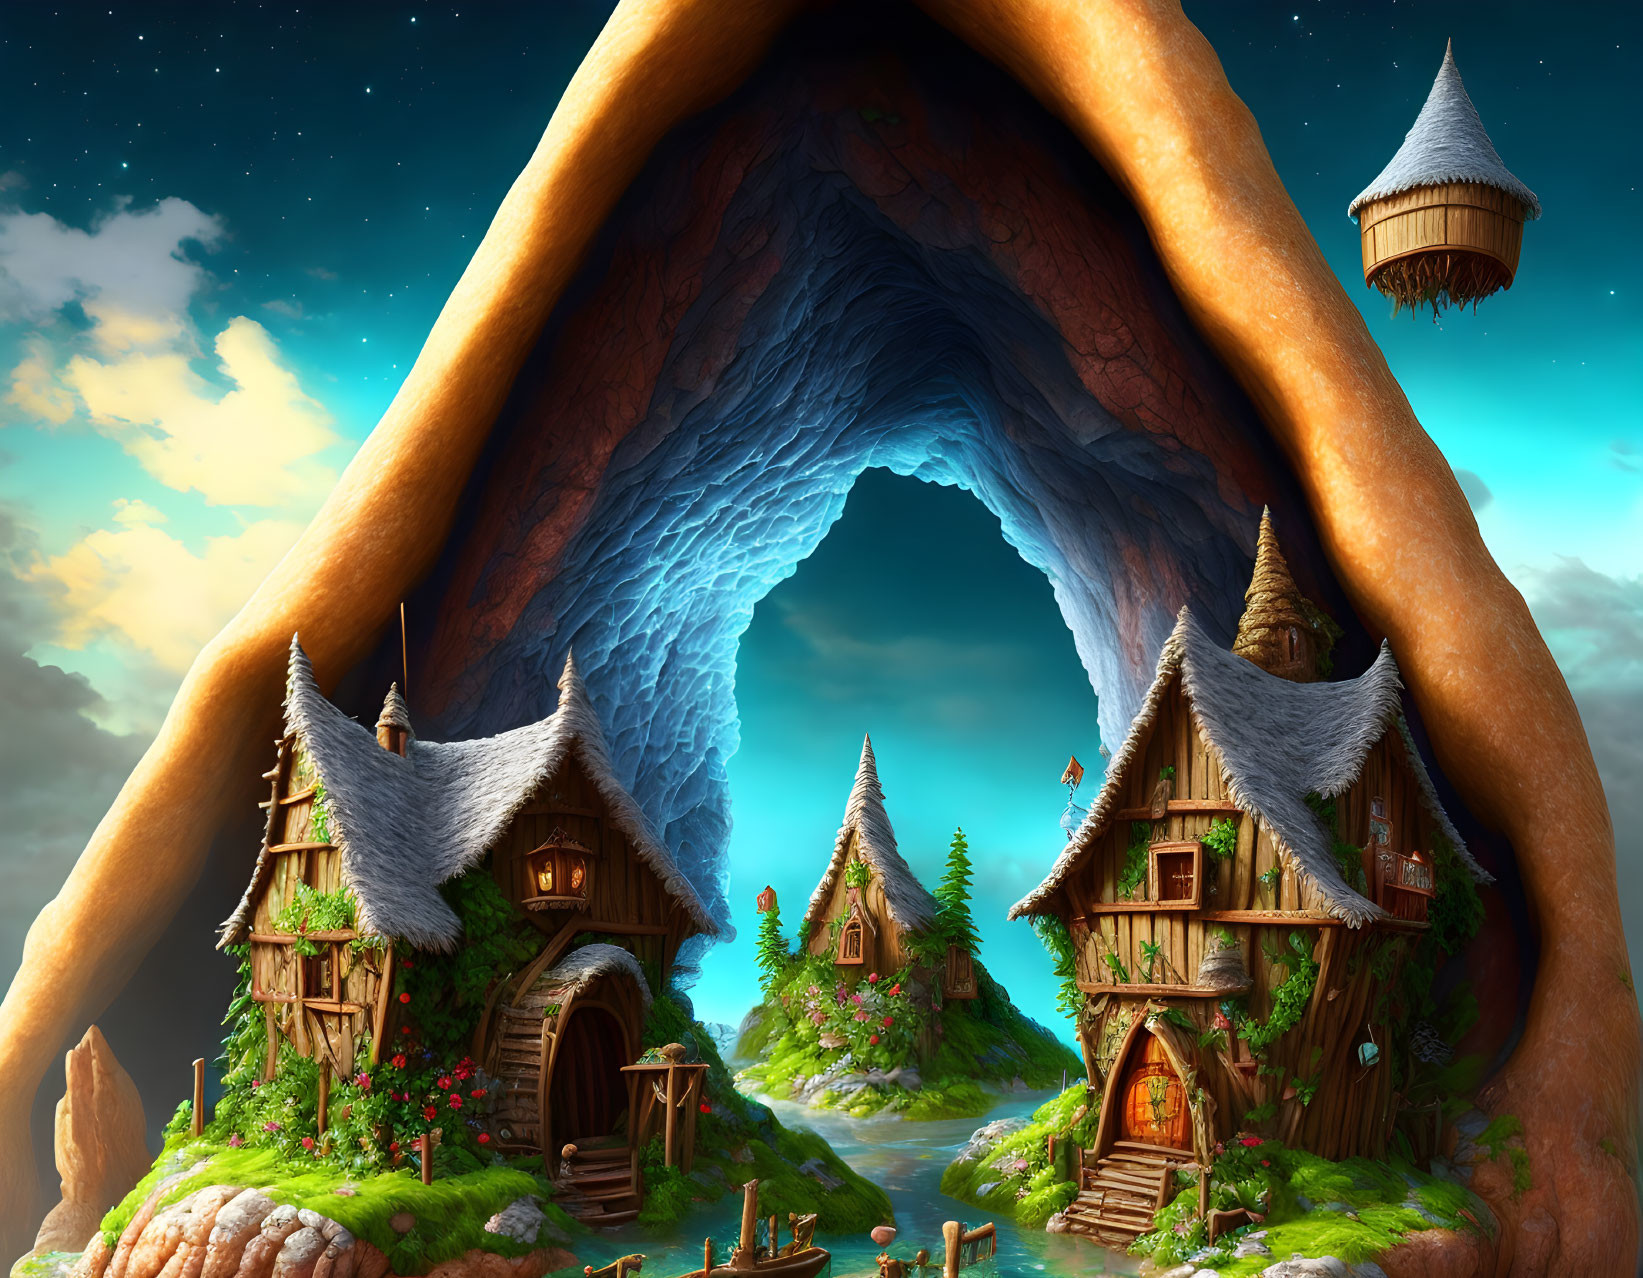 Whimsical cottages under giant tree arch in fantasy landscape